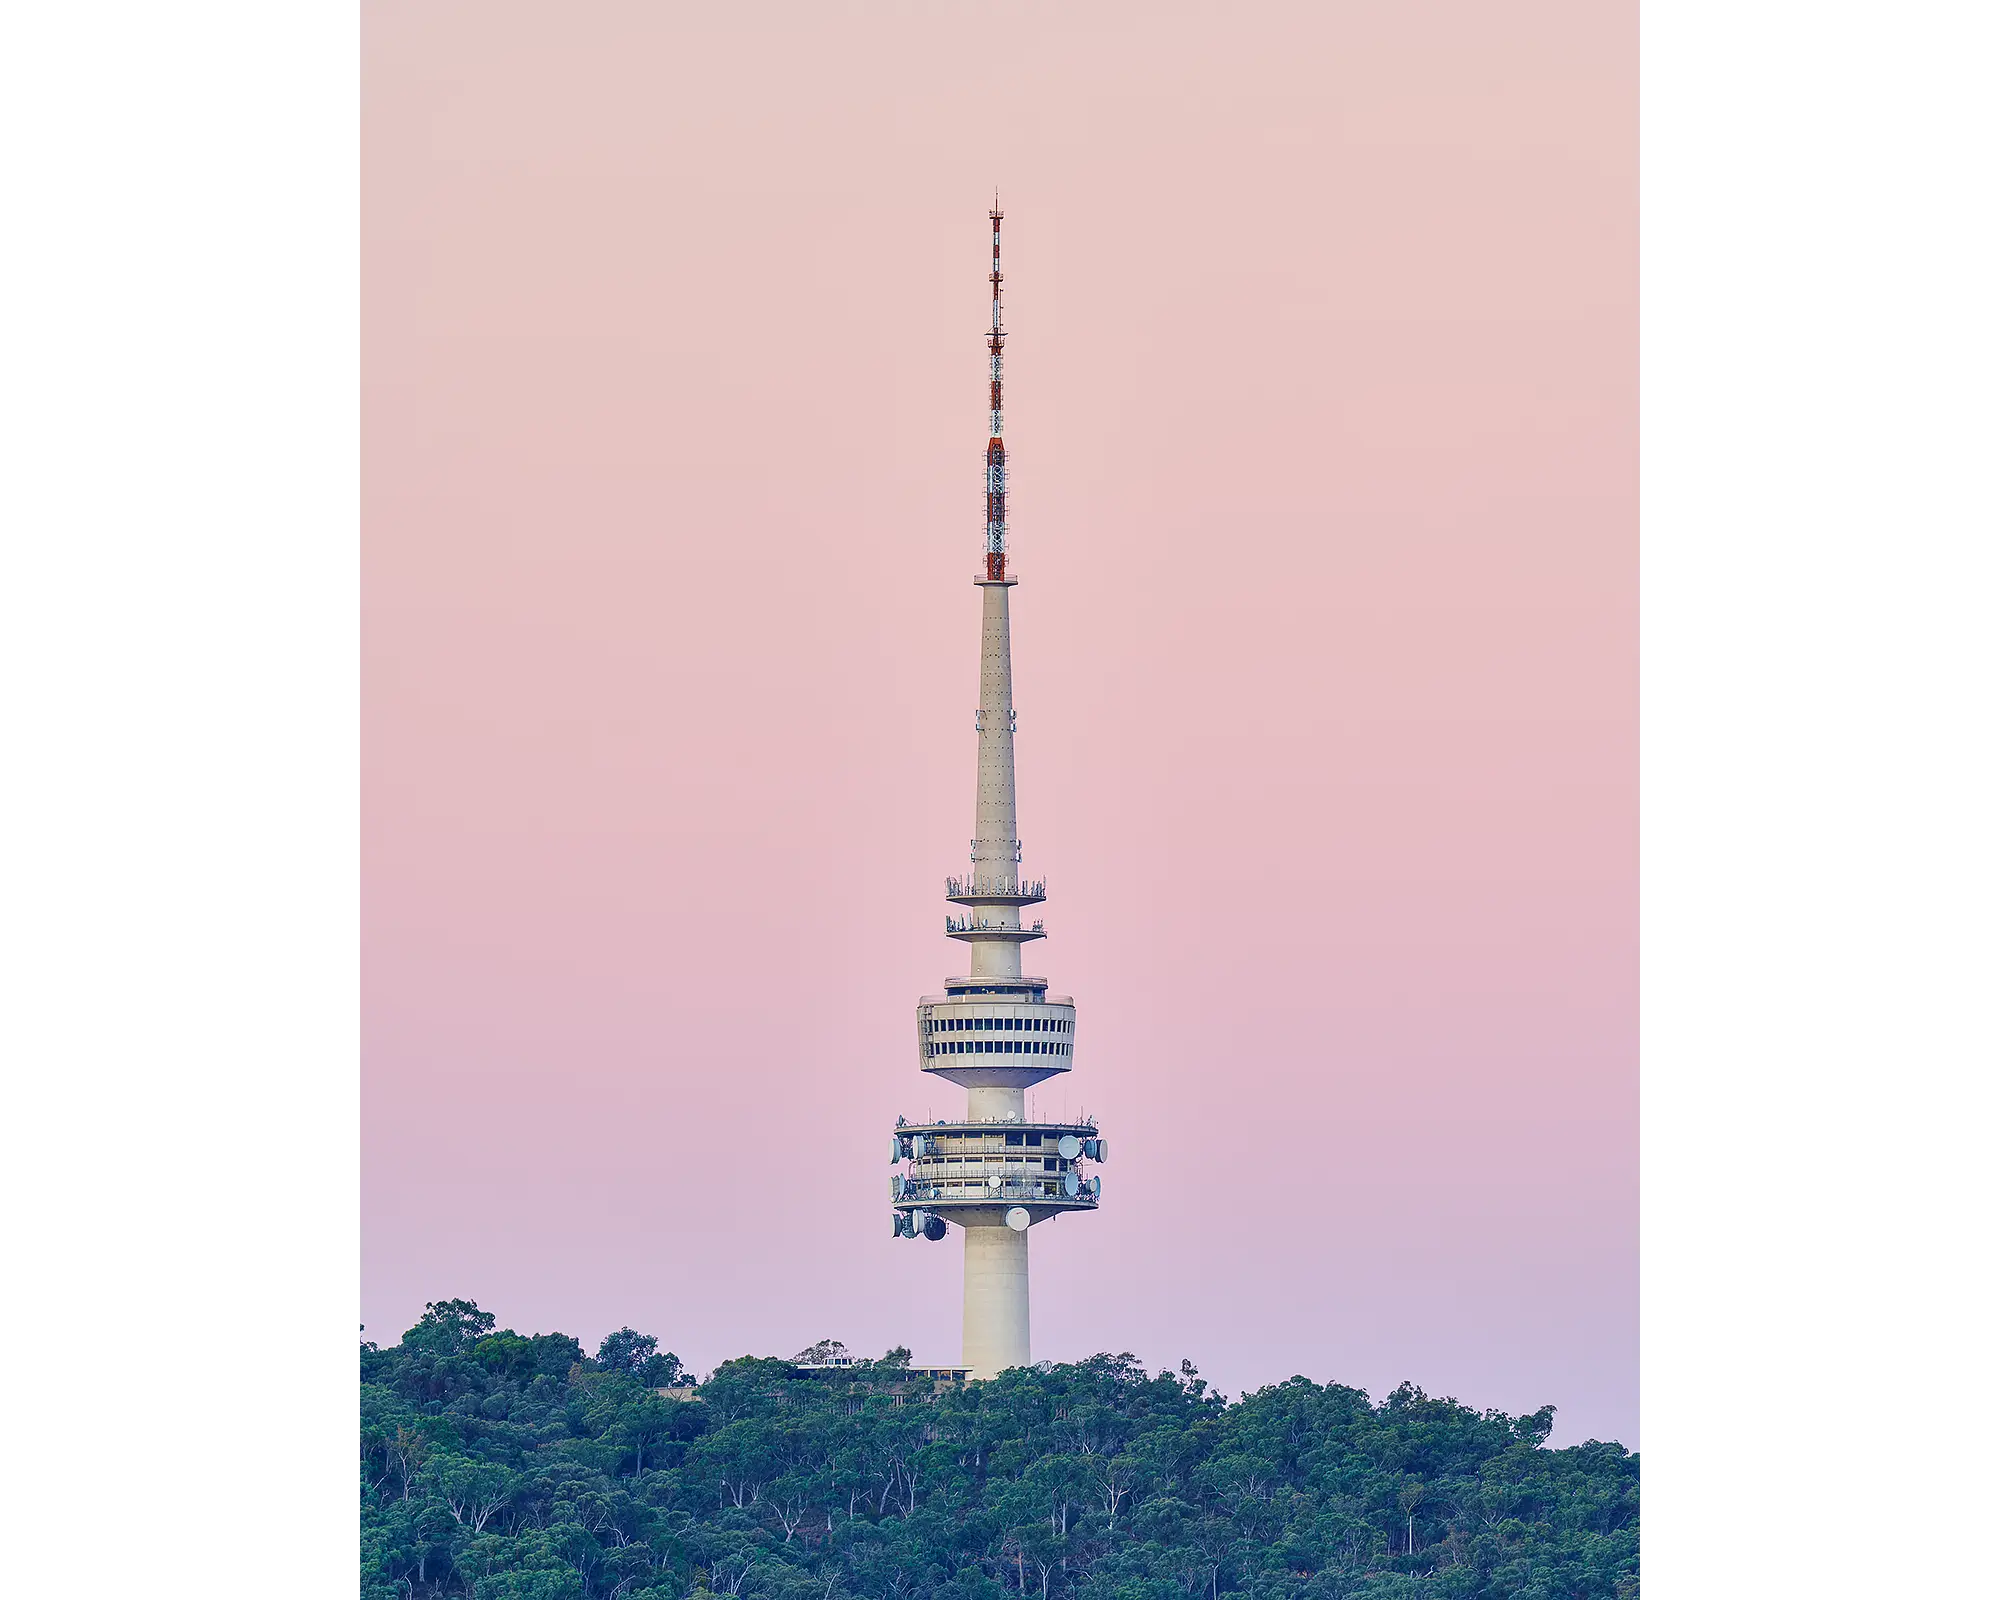 Telstra Tower, Black Mountain, Canberra, with pink sunset.